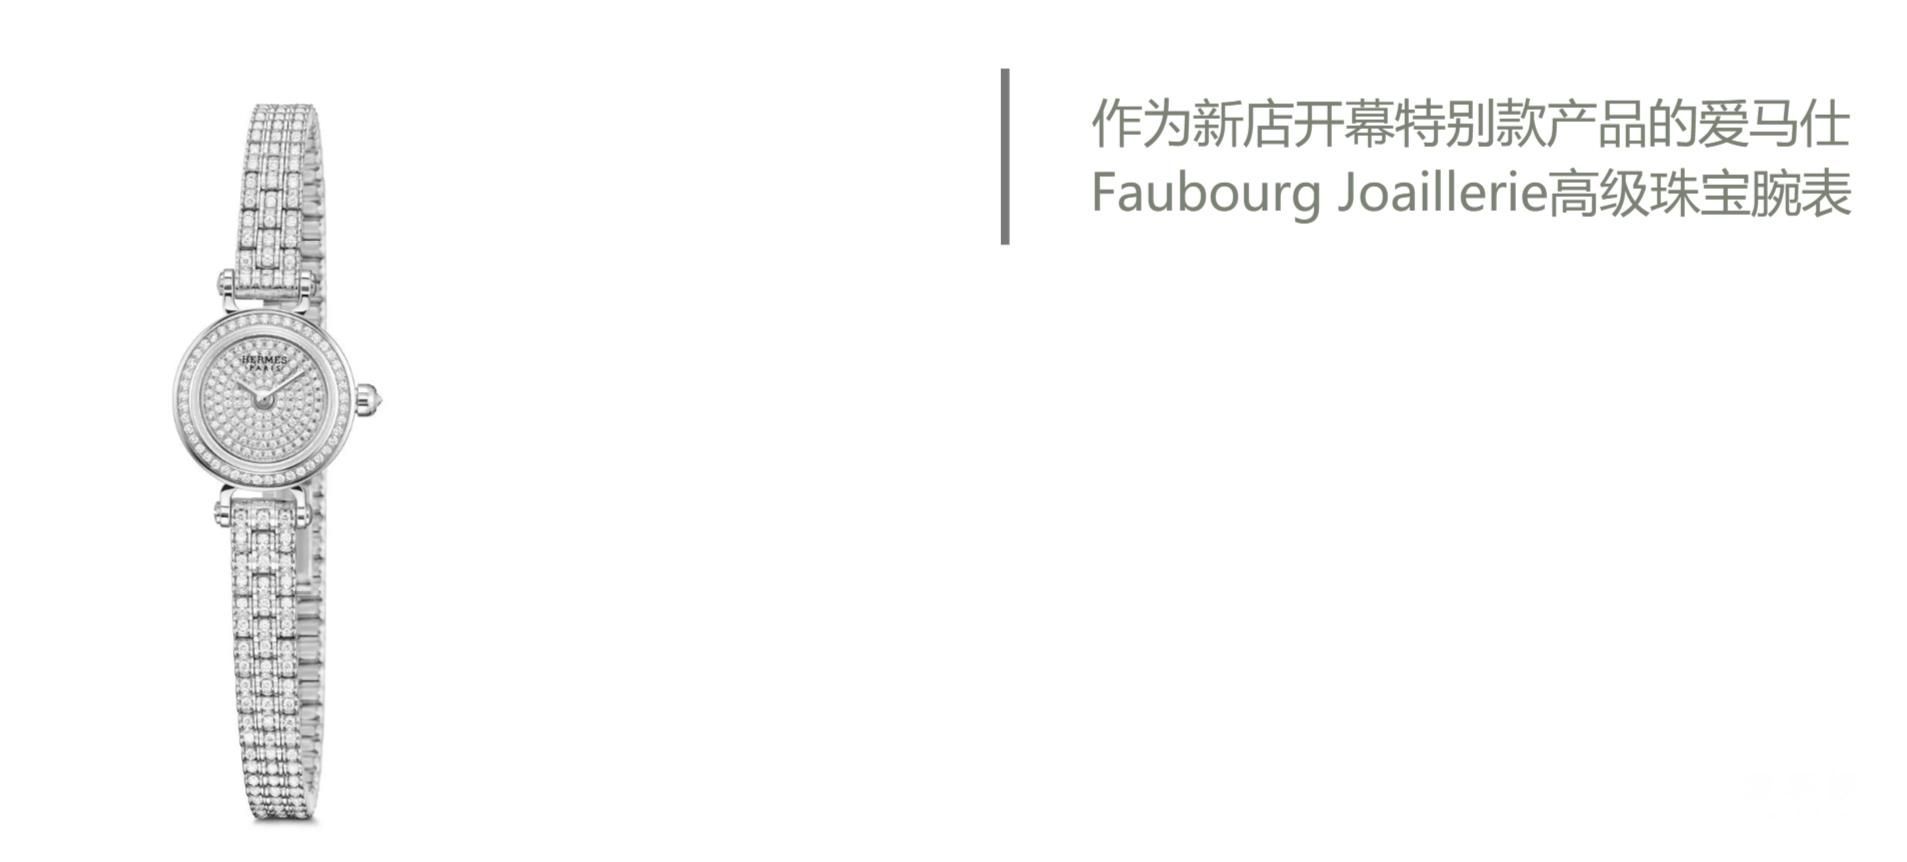 Faubourg Joaillerie߼鱦